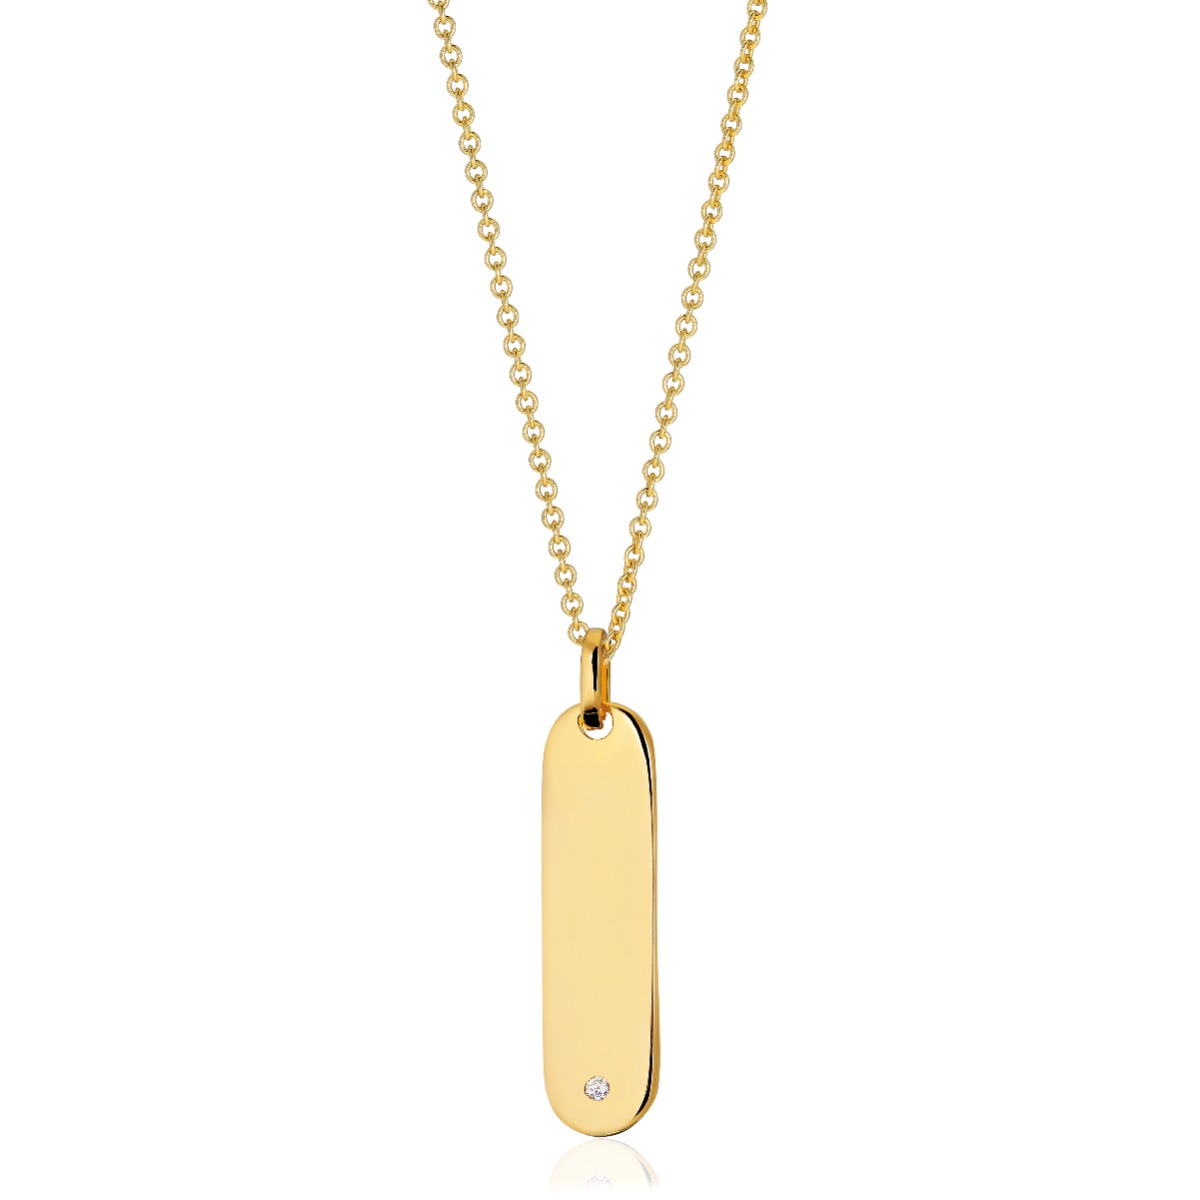 Sif Jakobs Follina Lungo Grande Necklace - Gold with White Zirconia